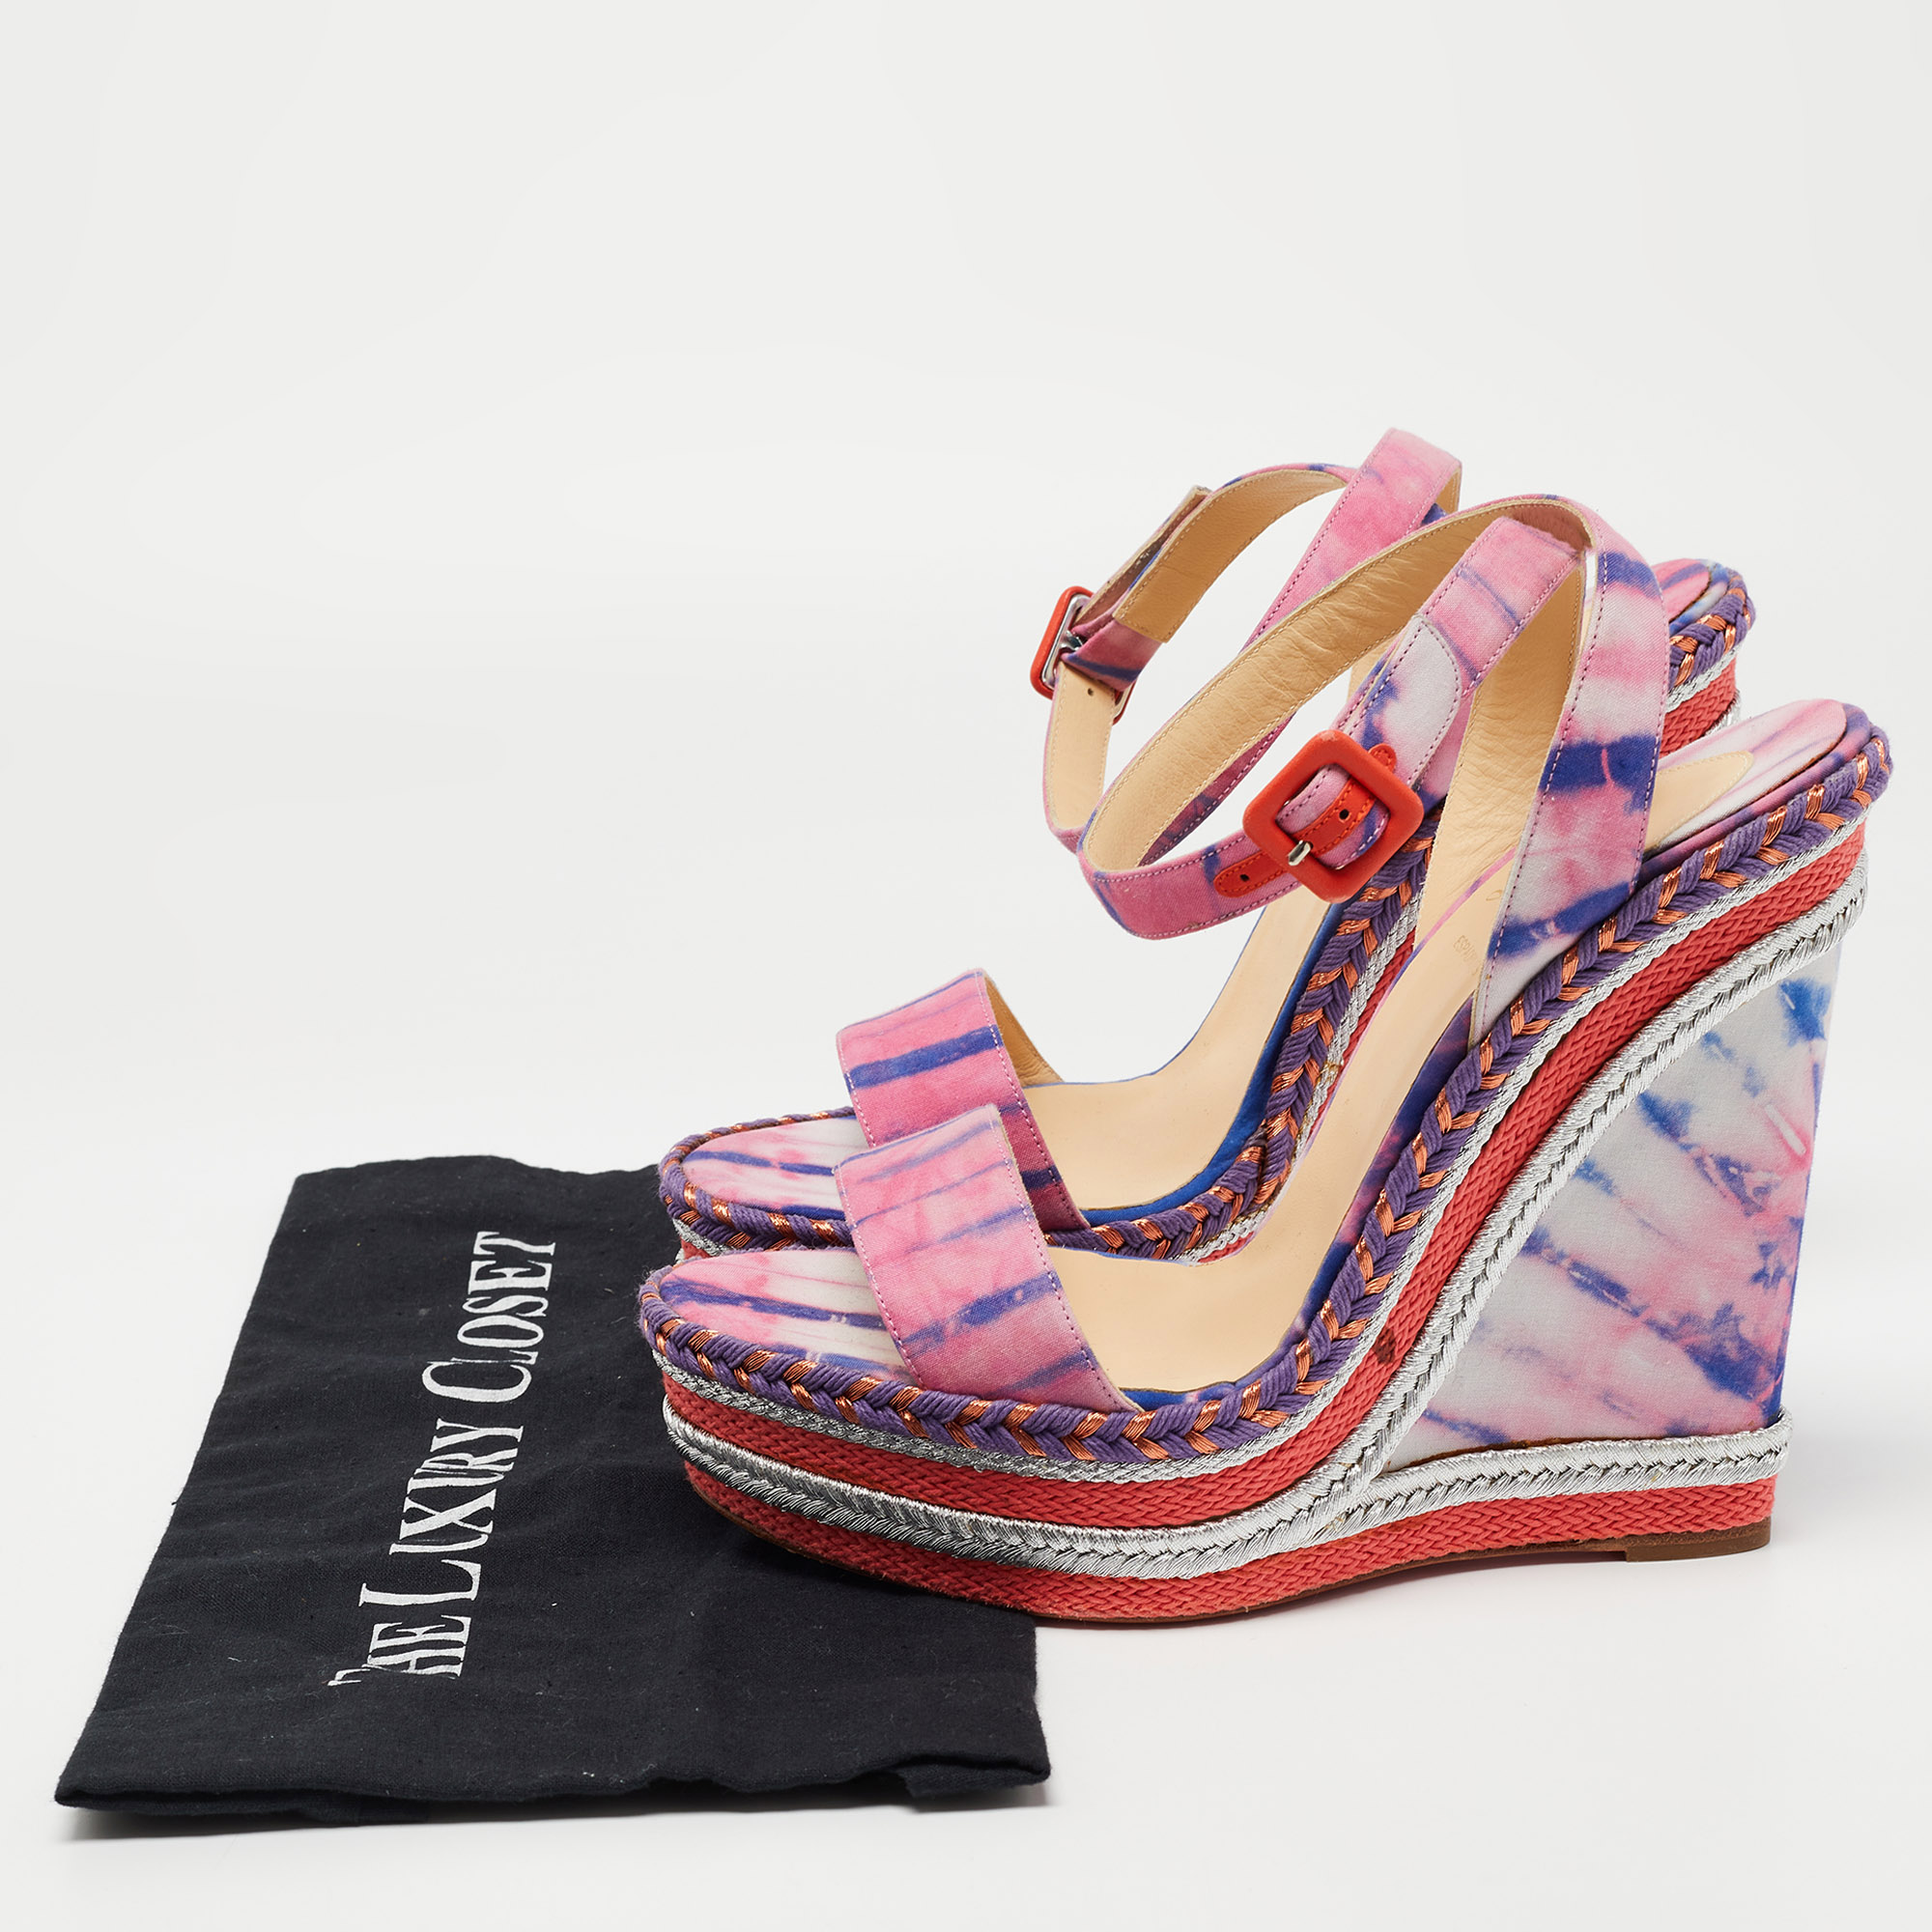 Christian Louboutin Multicolor Tie-Dye Fabric Duplice Wedge Sandals Size 41